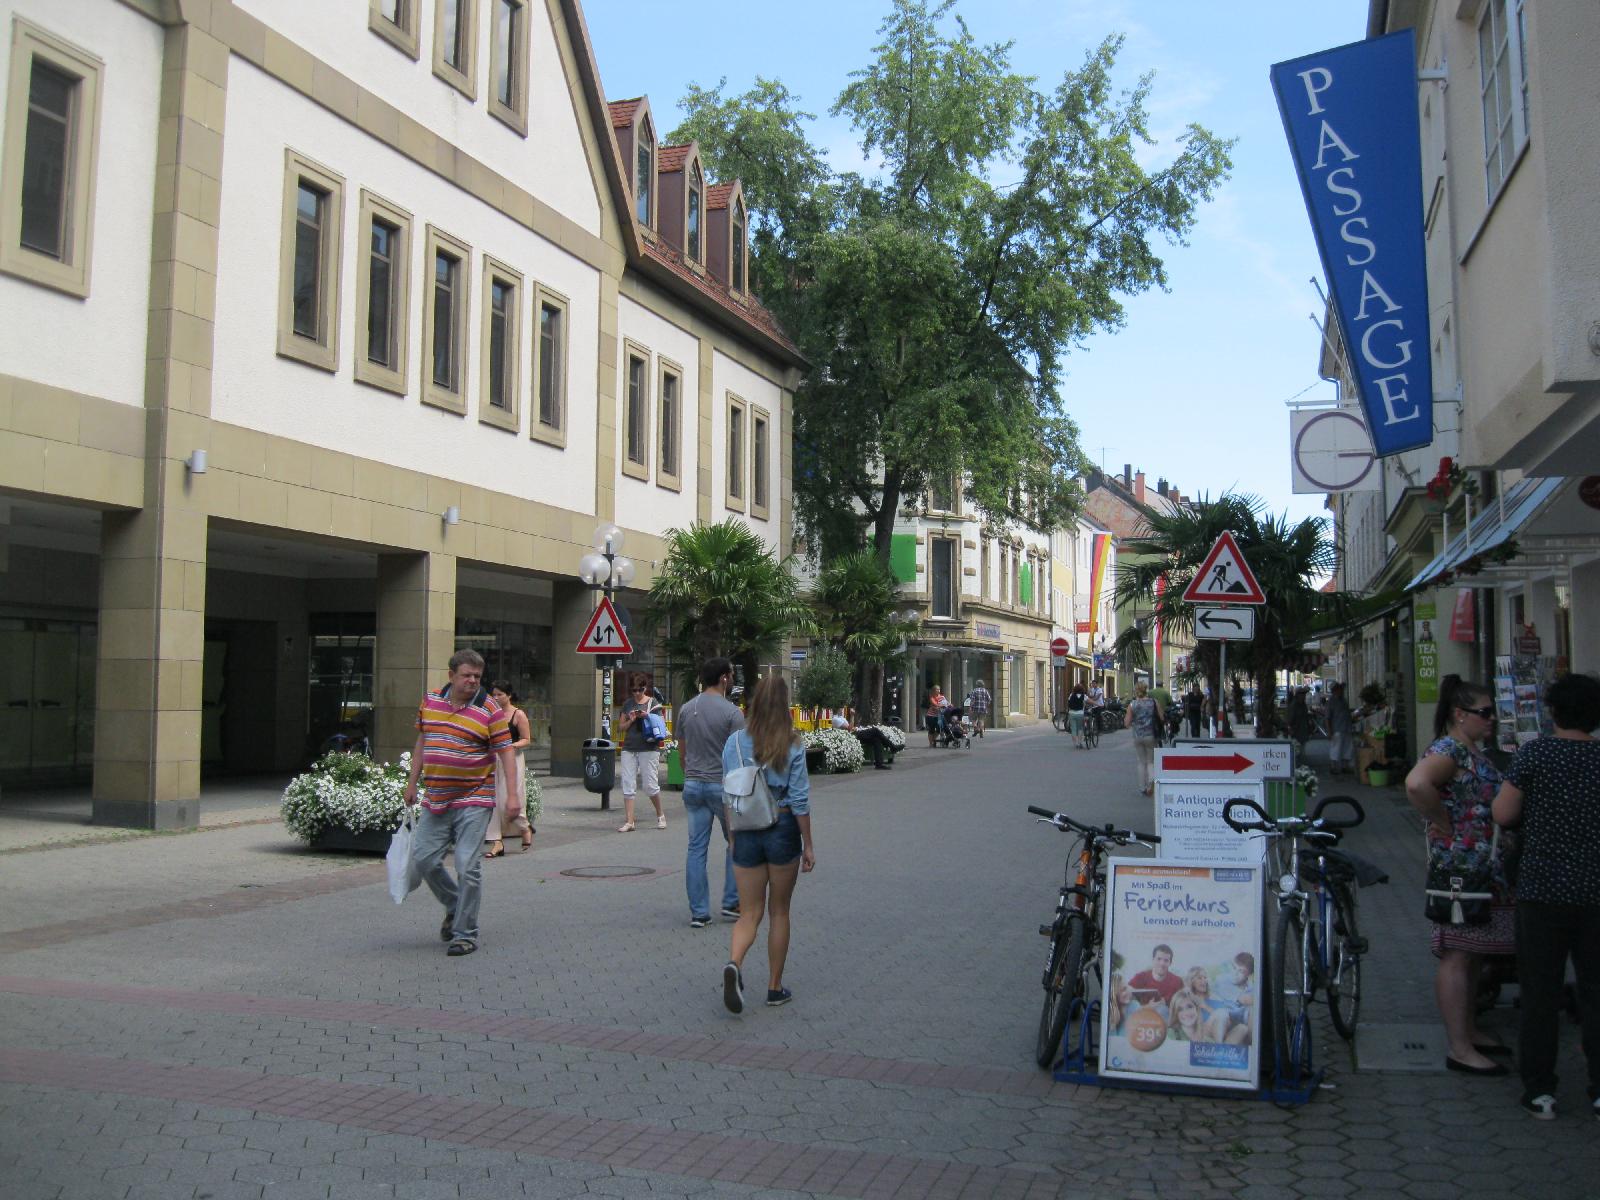 Near the town square